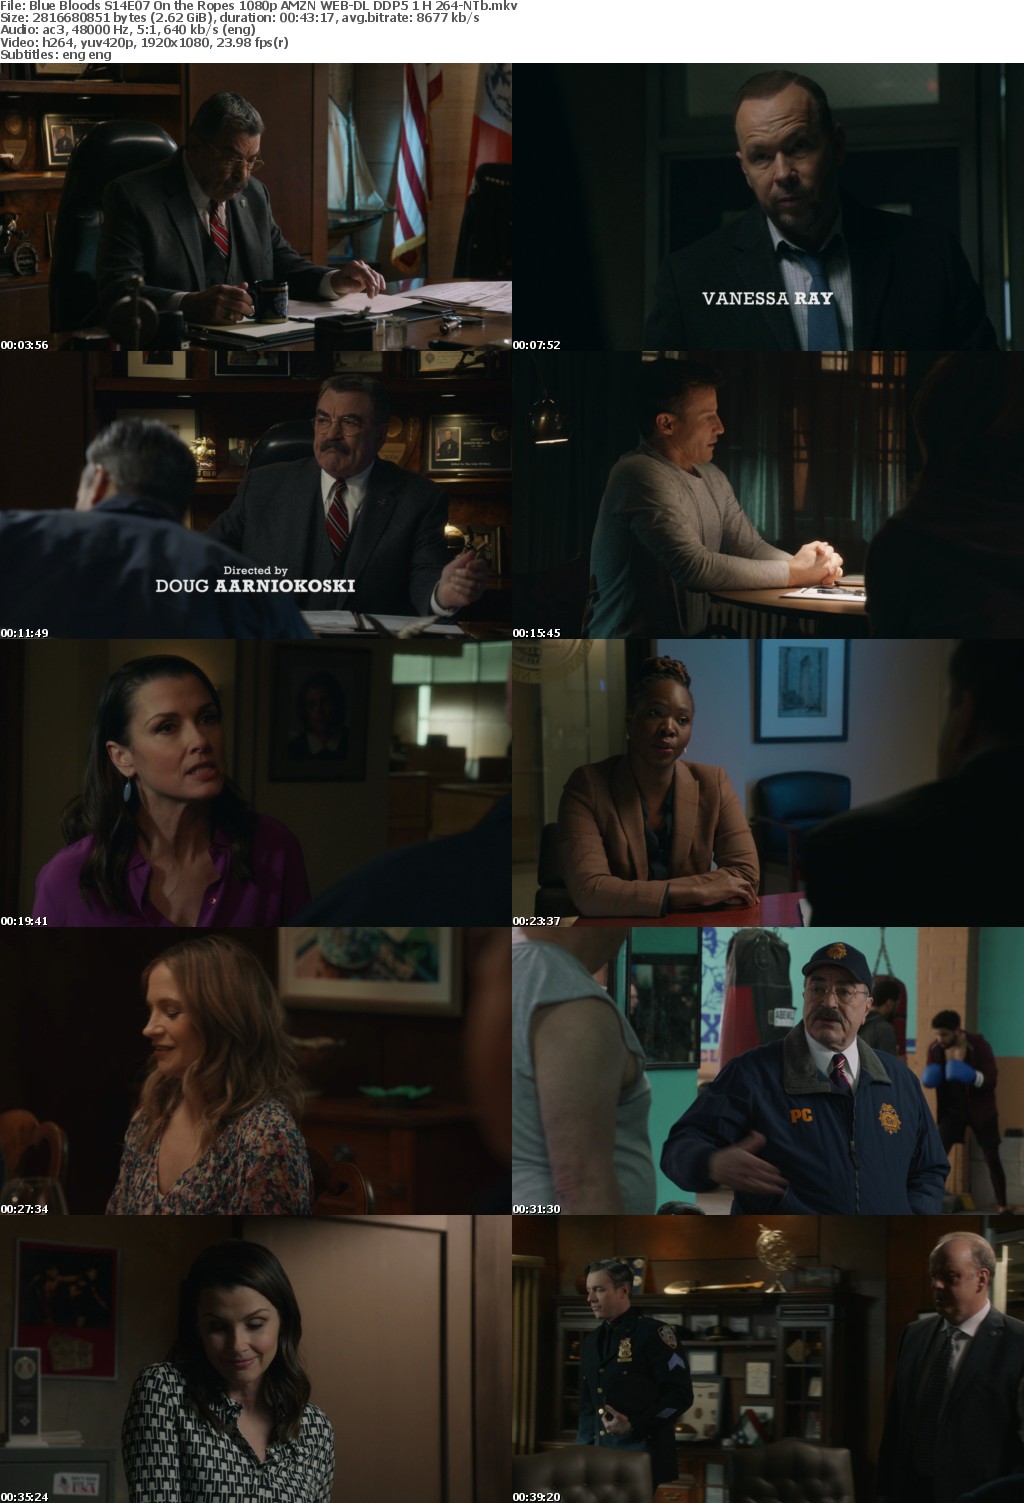 Blue Bloods S14E07 On the Ropes 1080p AMZN WEB-DL DDP5 1 H 264-NTb